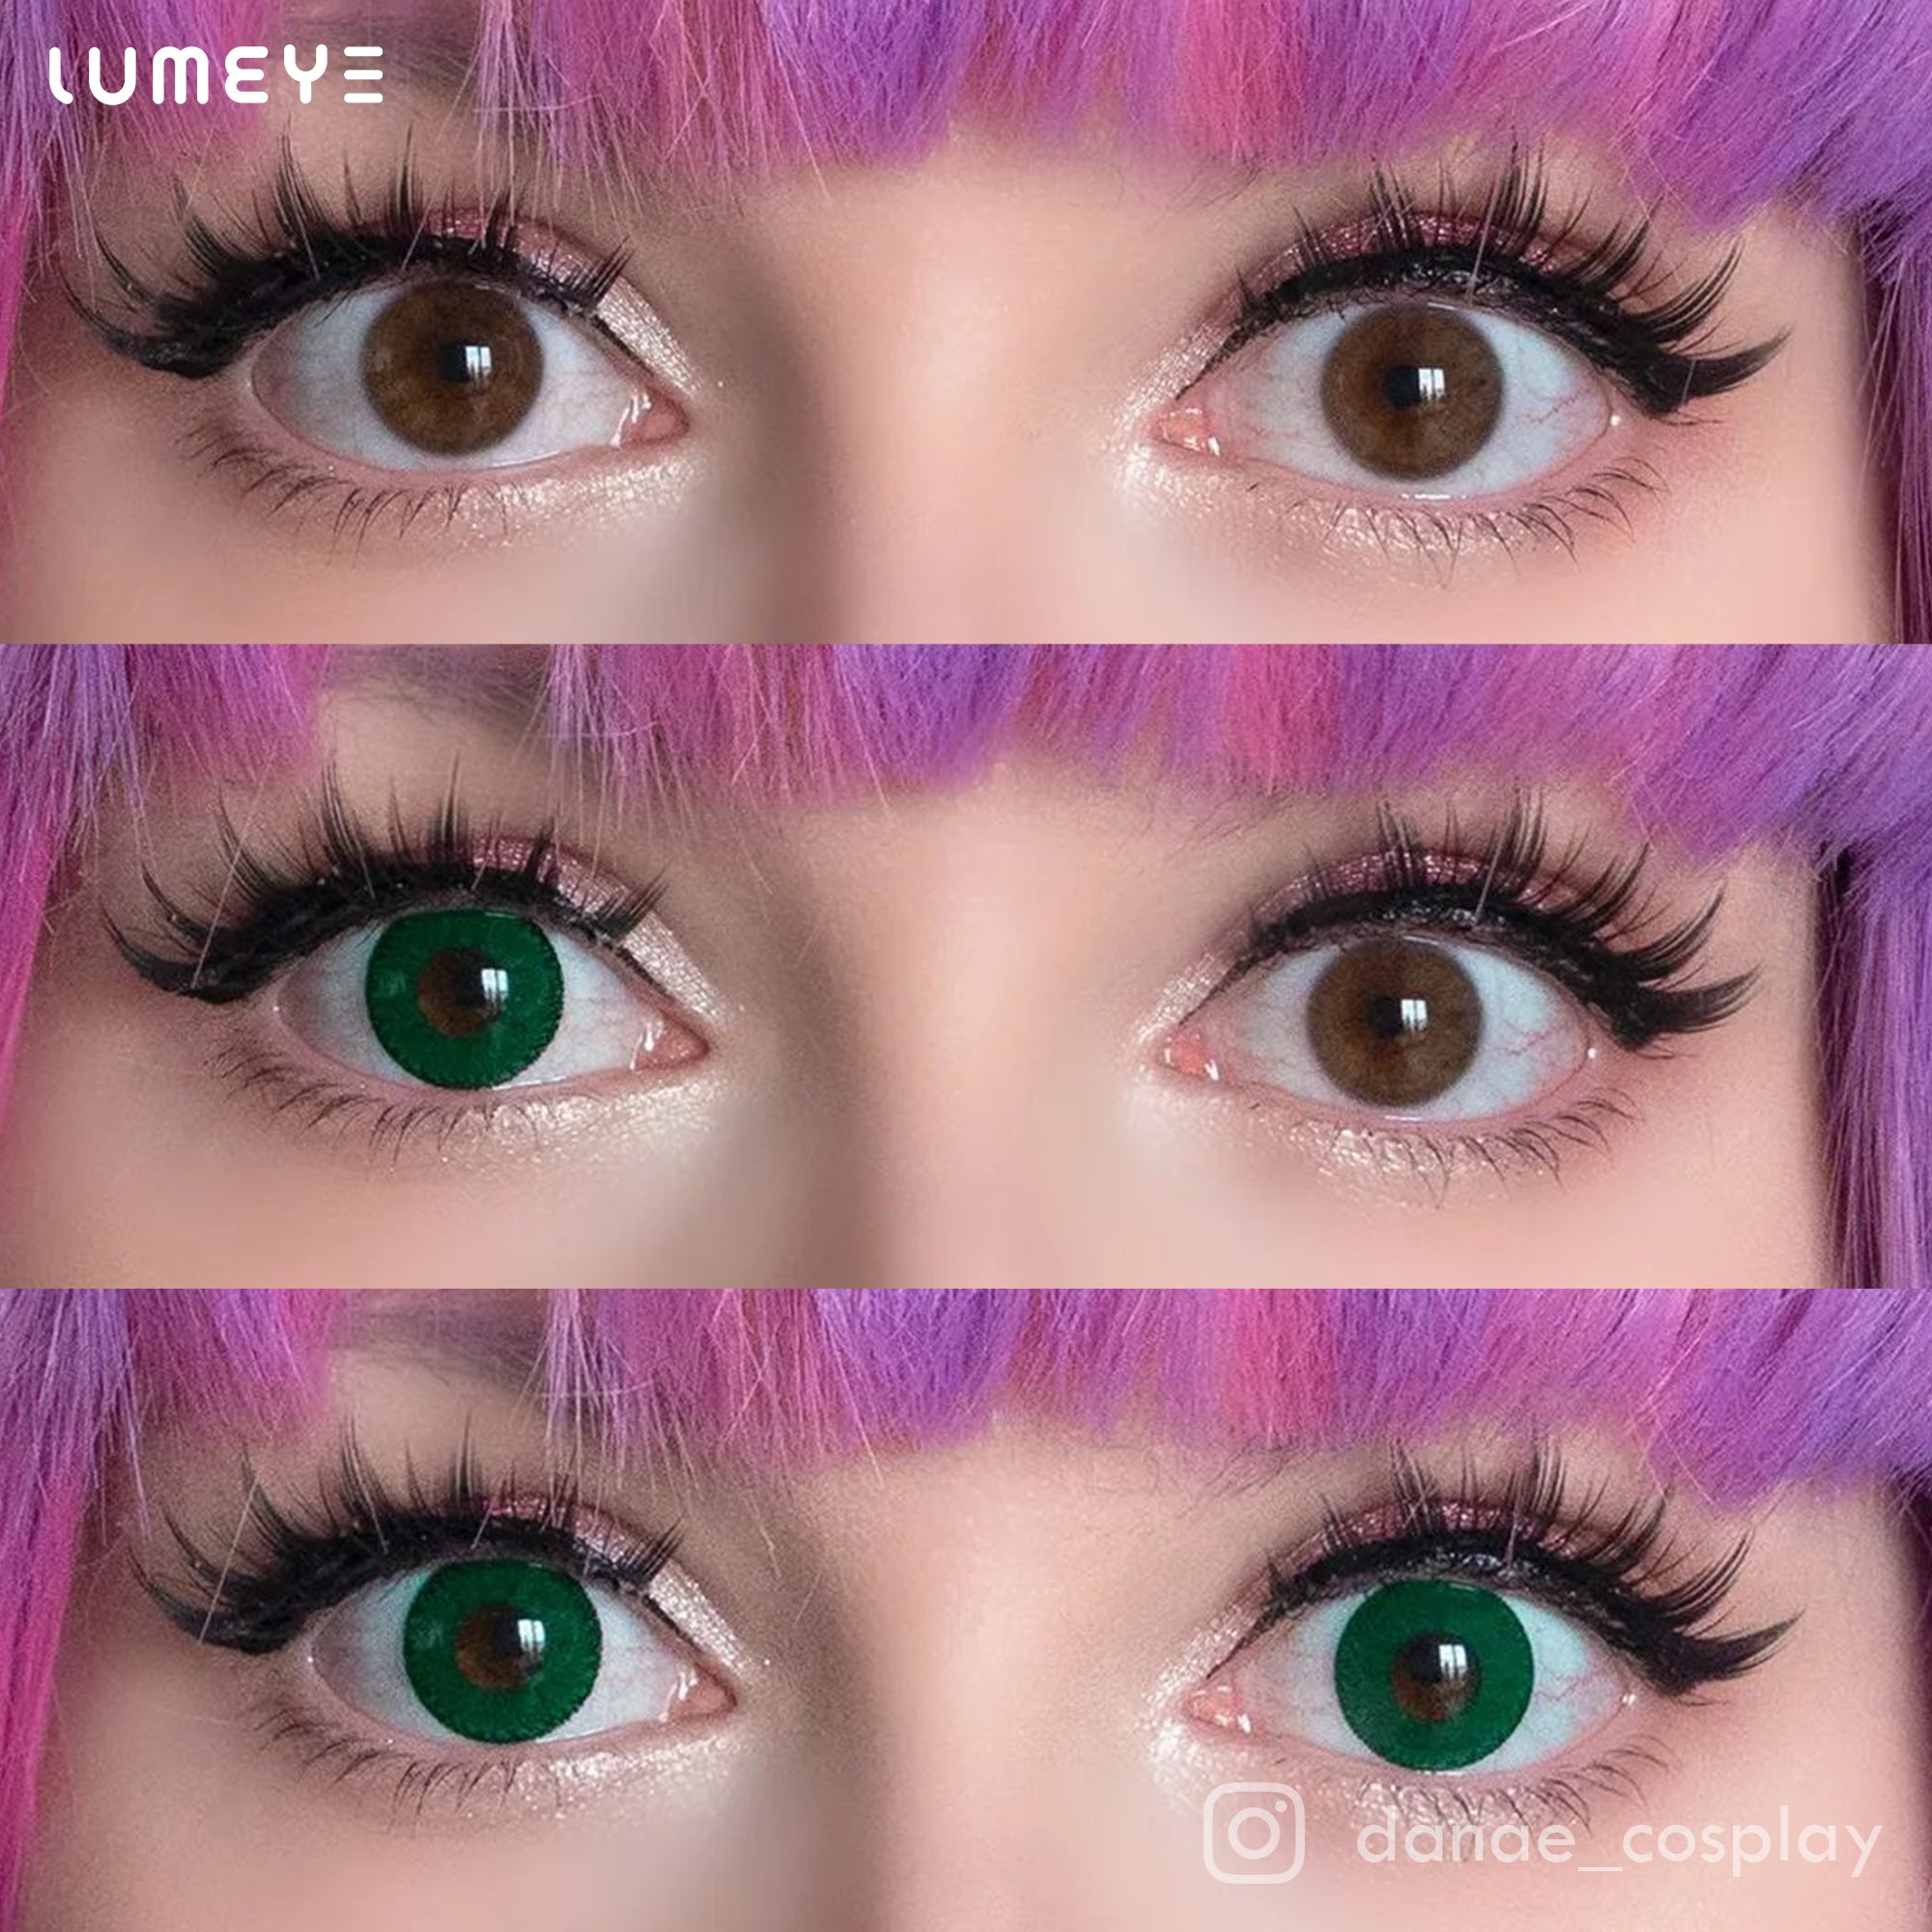 Best COLORED CONTACTS - LUMEYE Demon Green Colored Contact Lenses - LUMEYE